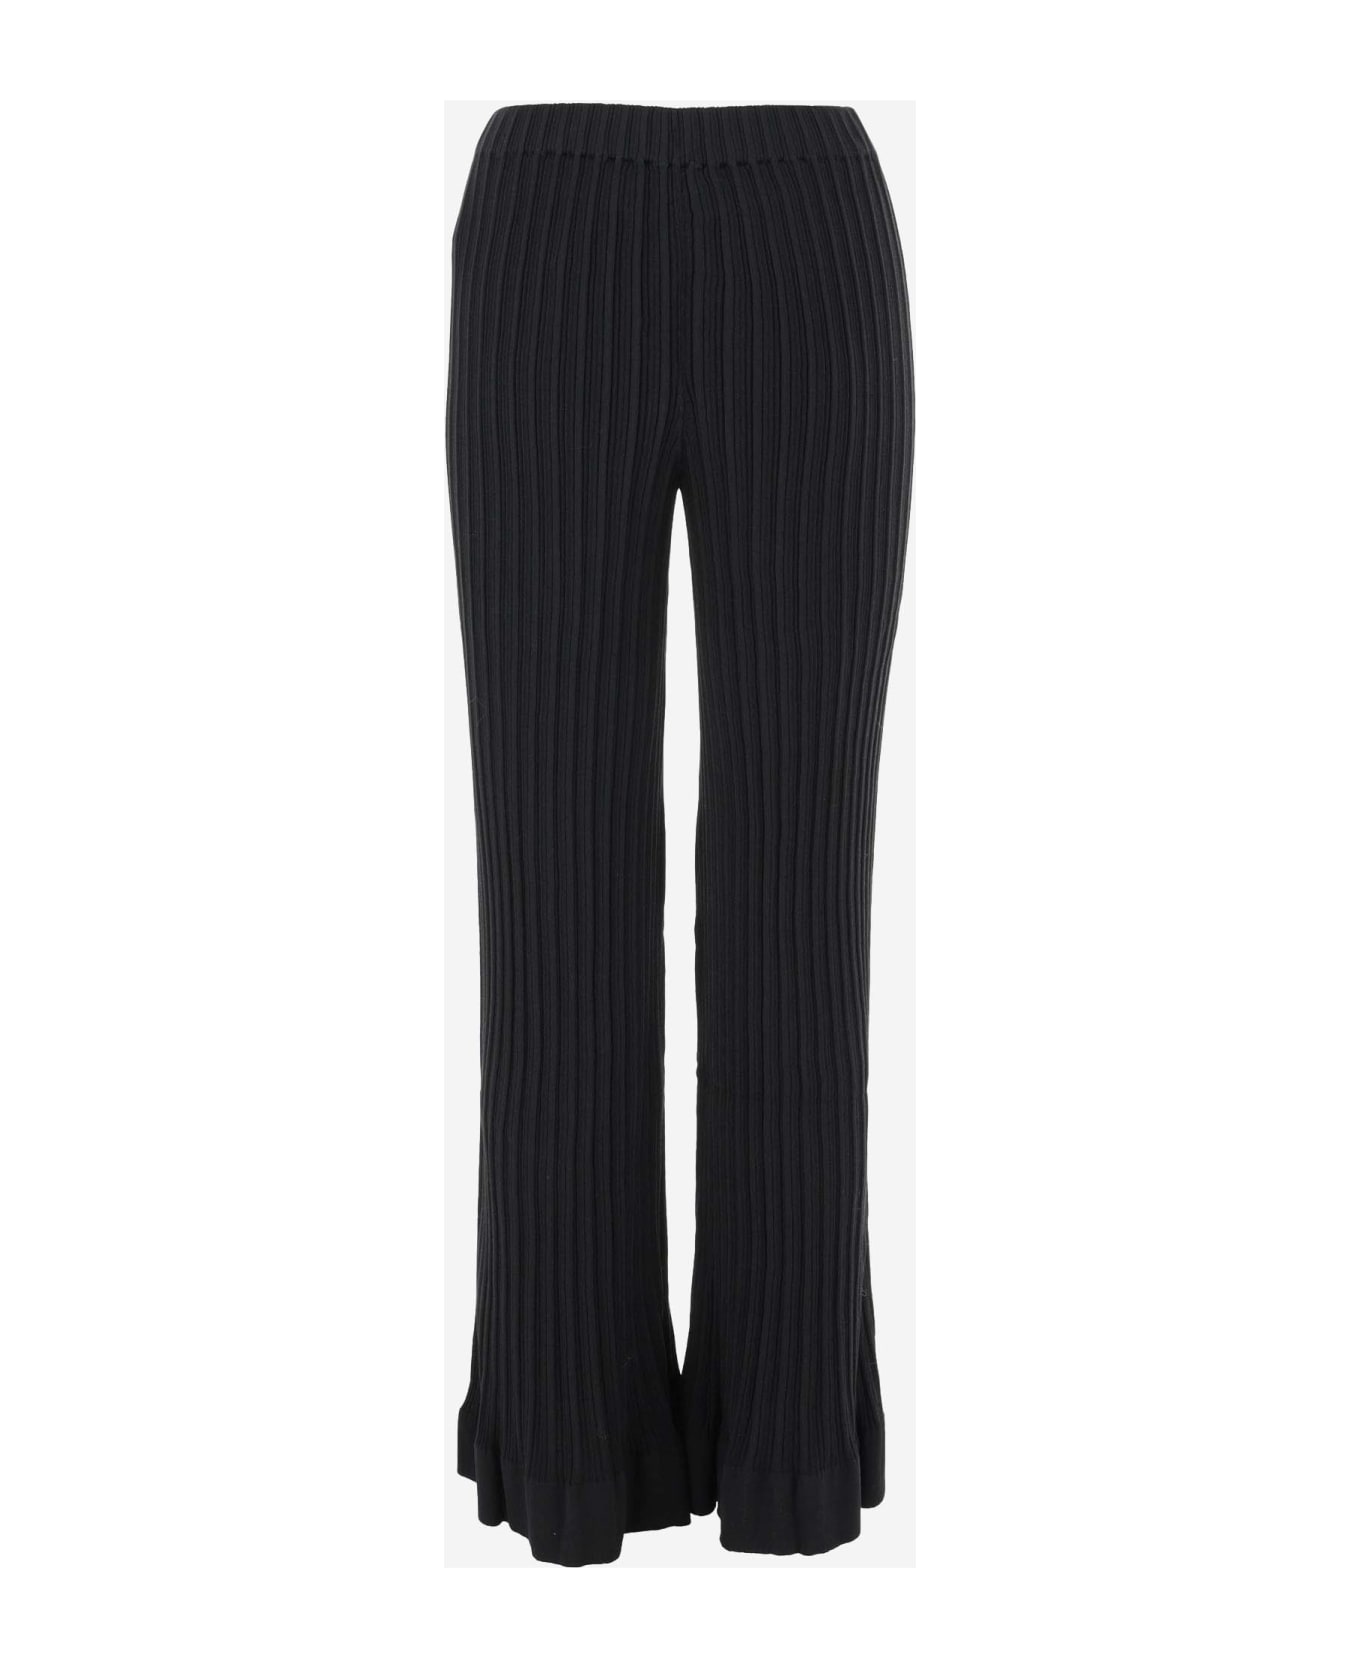 By Malene Birger Ribbed Cotton Blend Pants - Black ボトムス